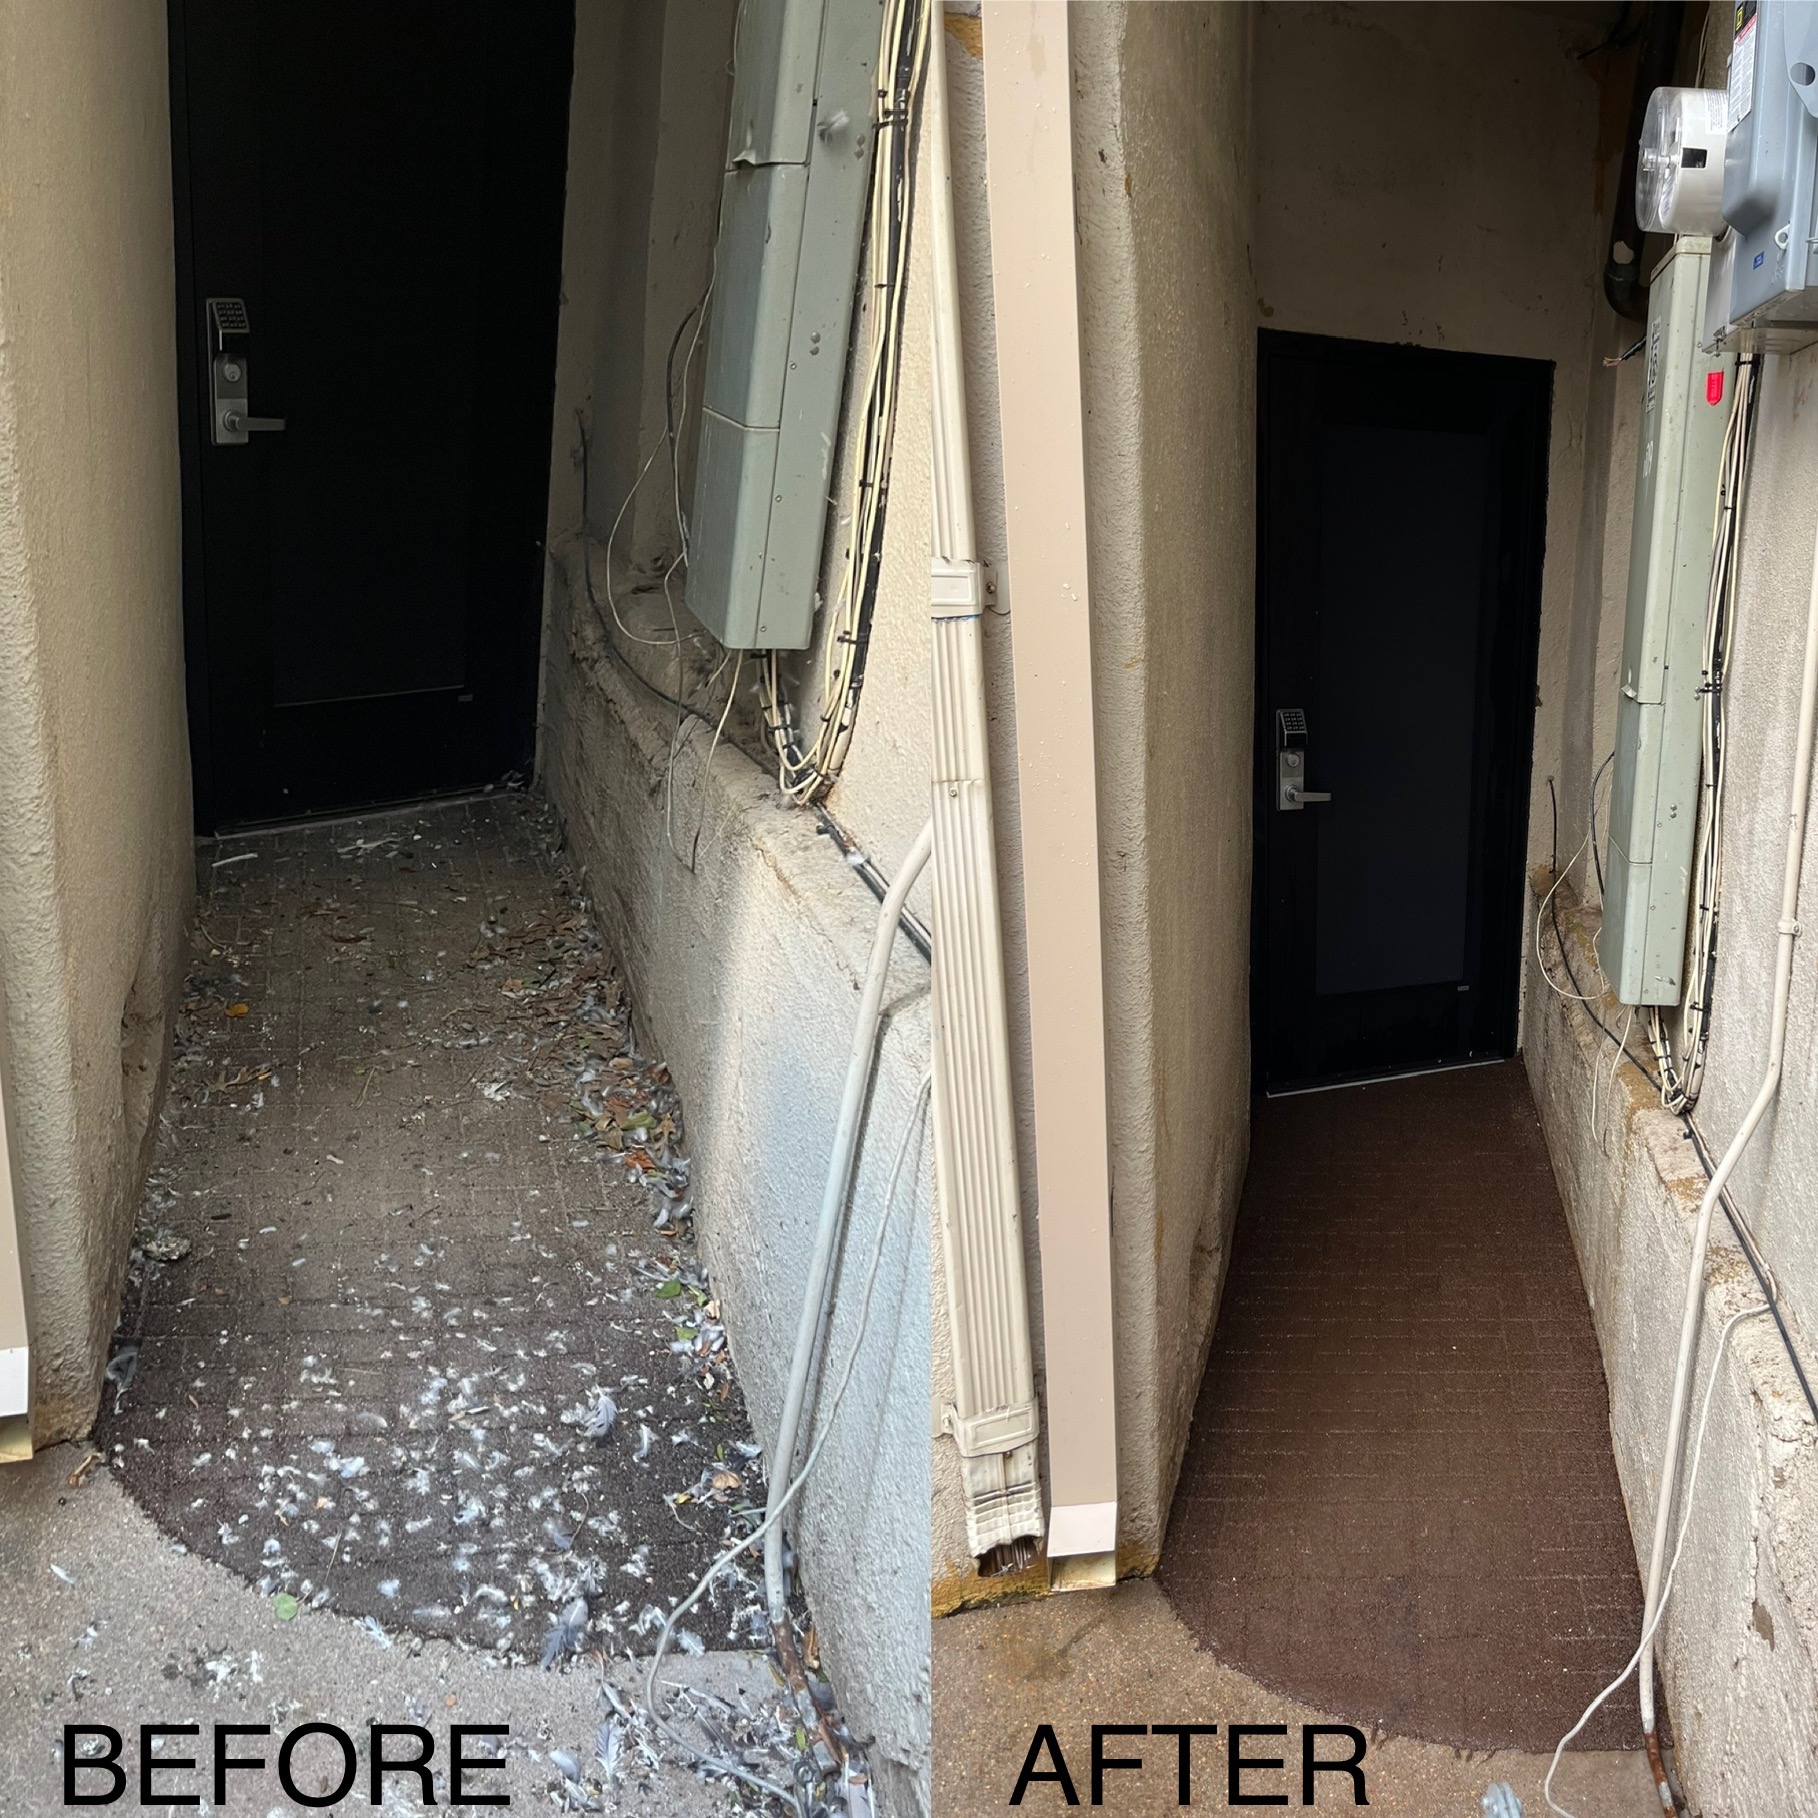 BUSINESS OWNERS' OFFICE ENTRANCE CLEANED UP IN GARDEN CITY 